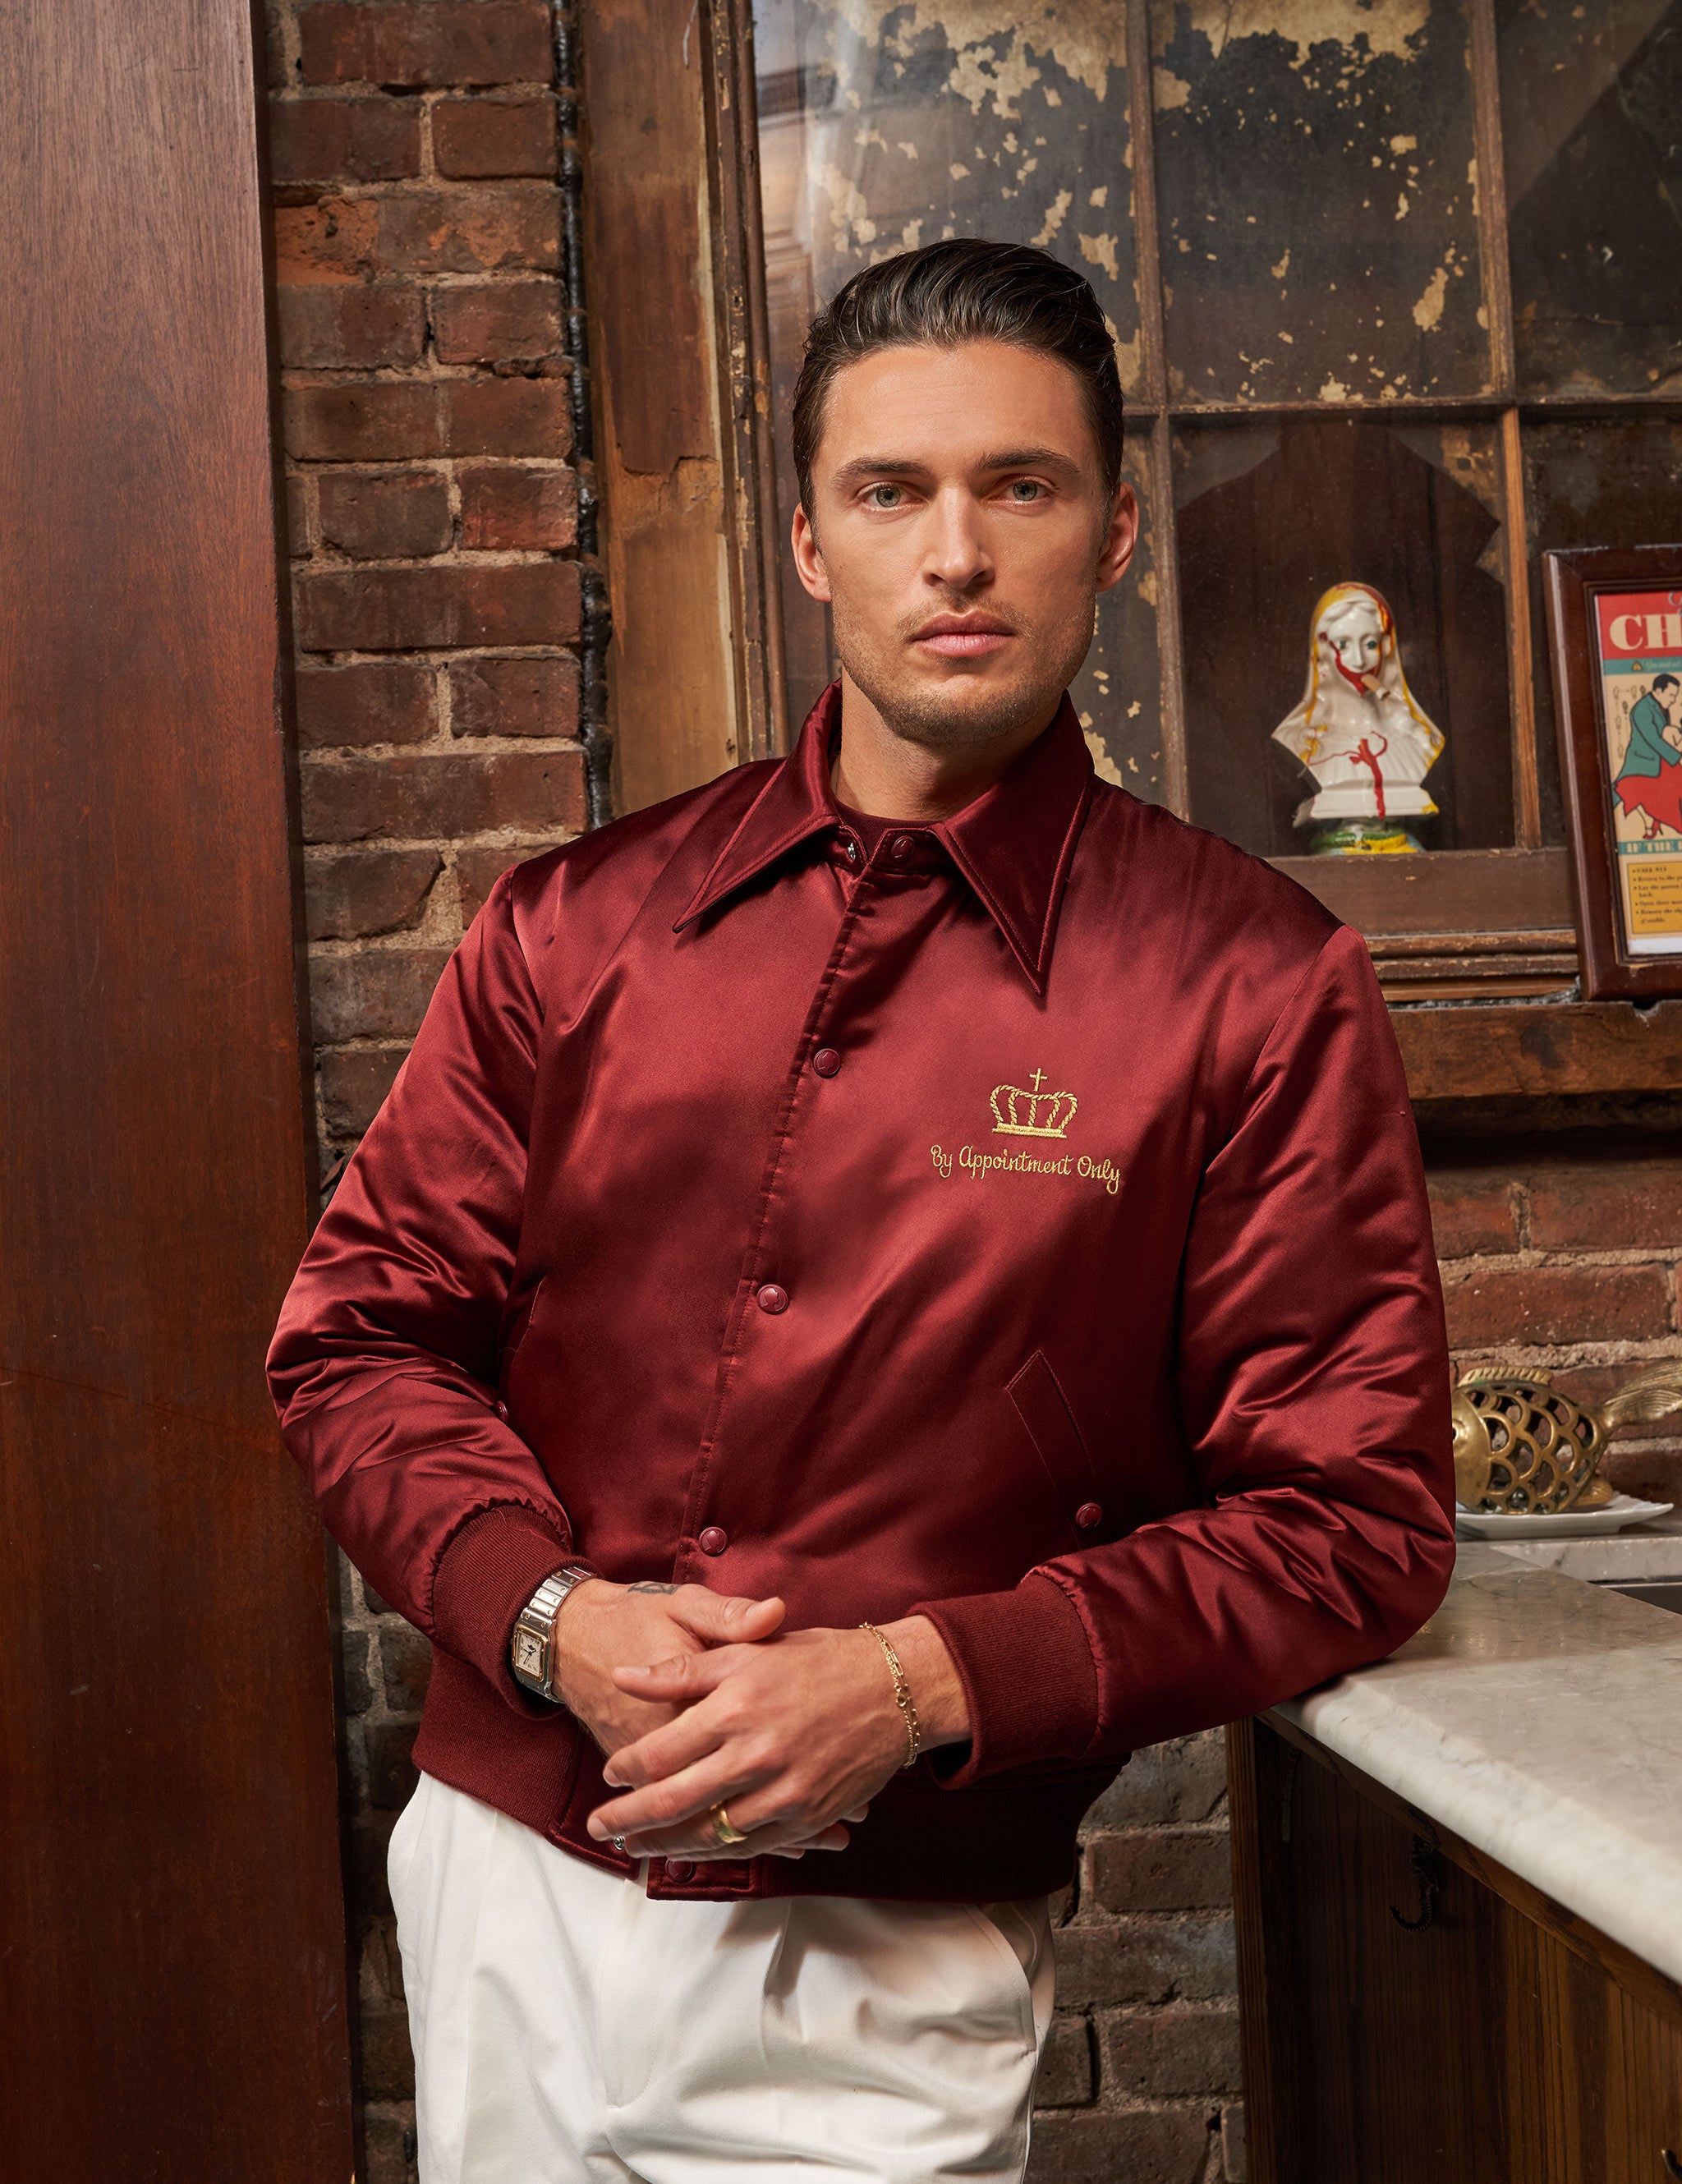 Satin Bomber – Our Lady of Rocco